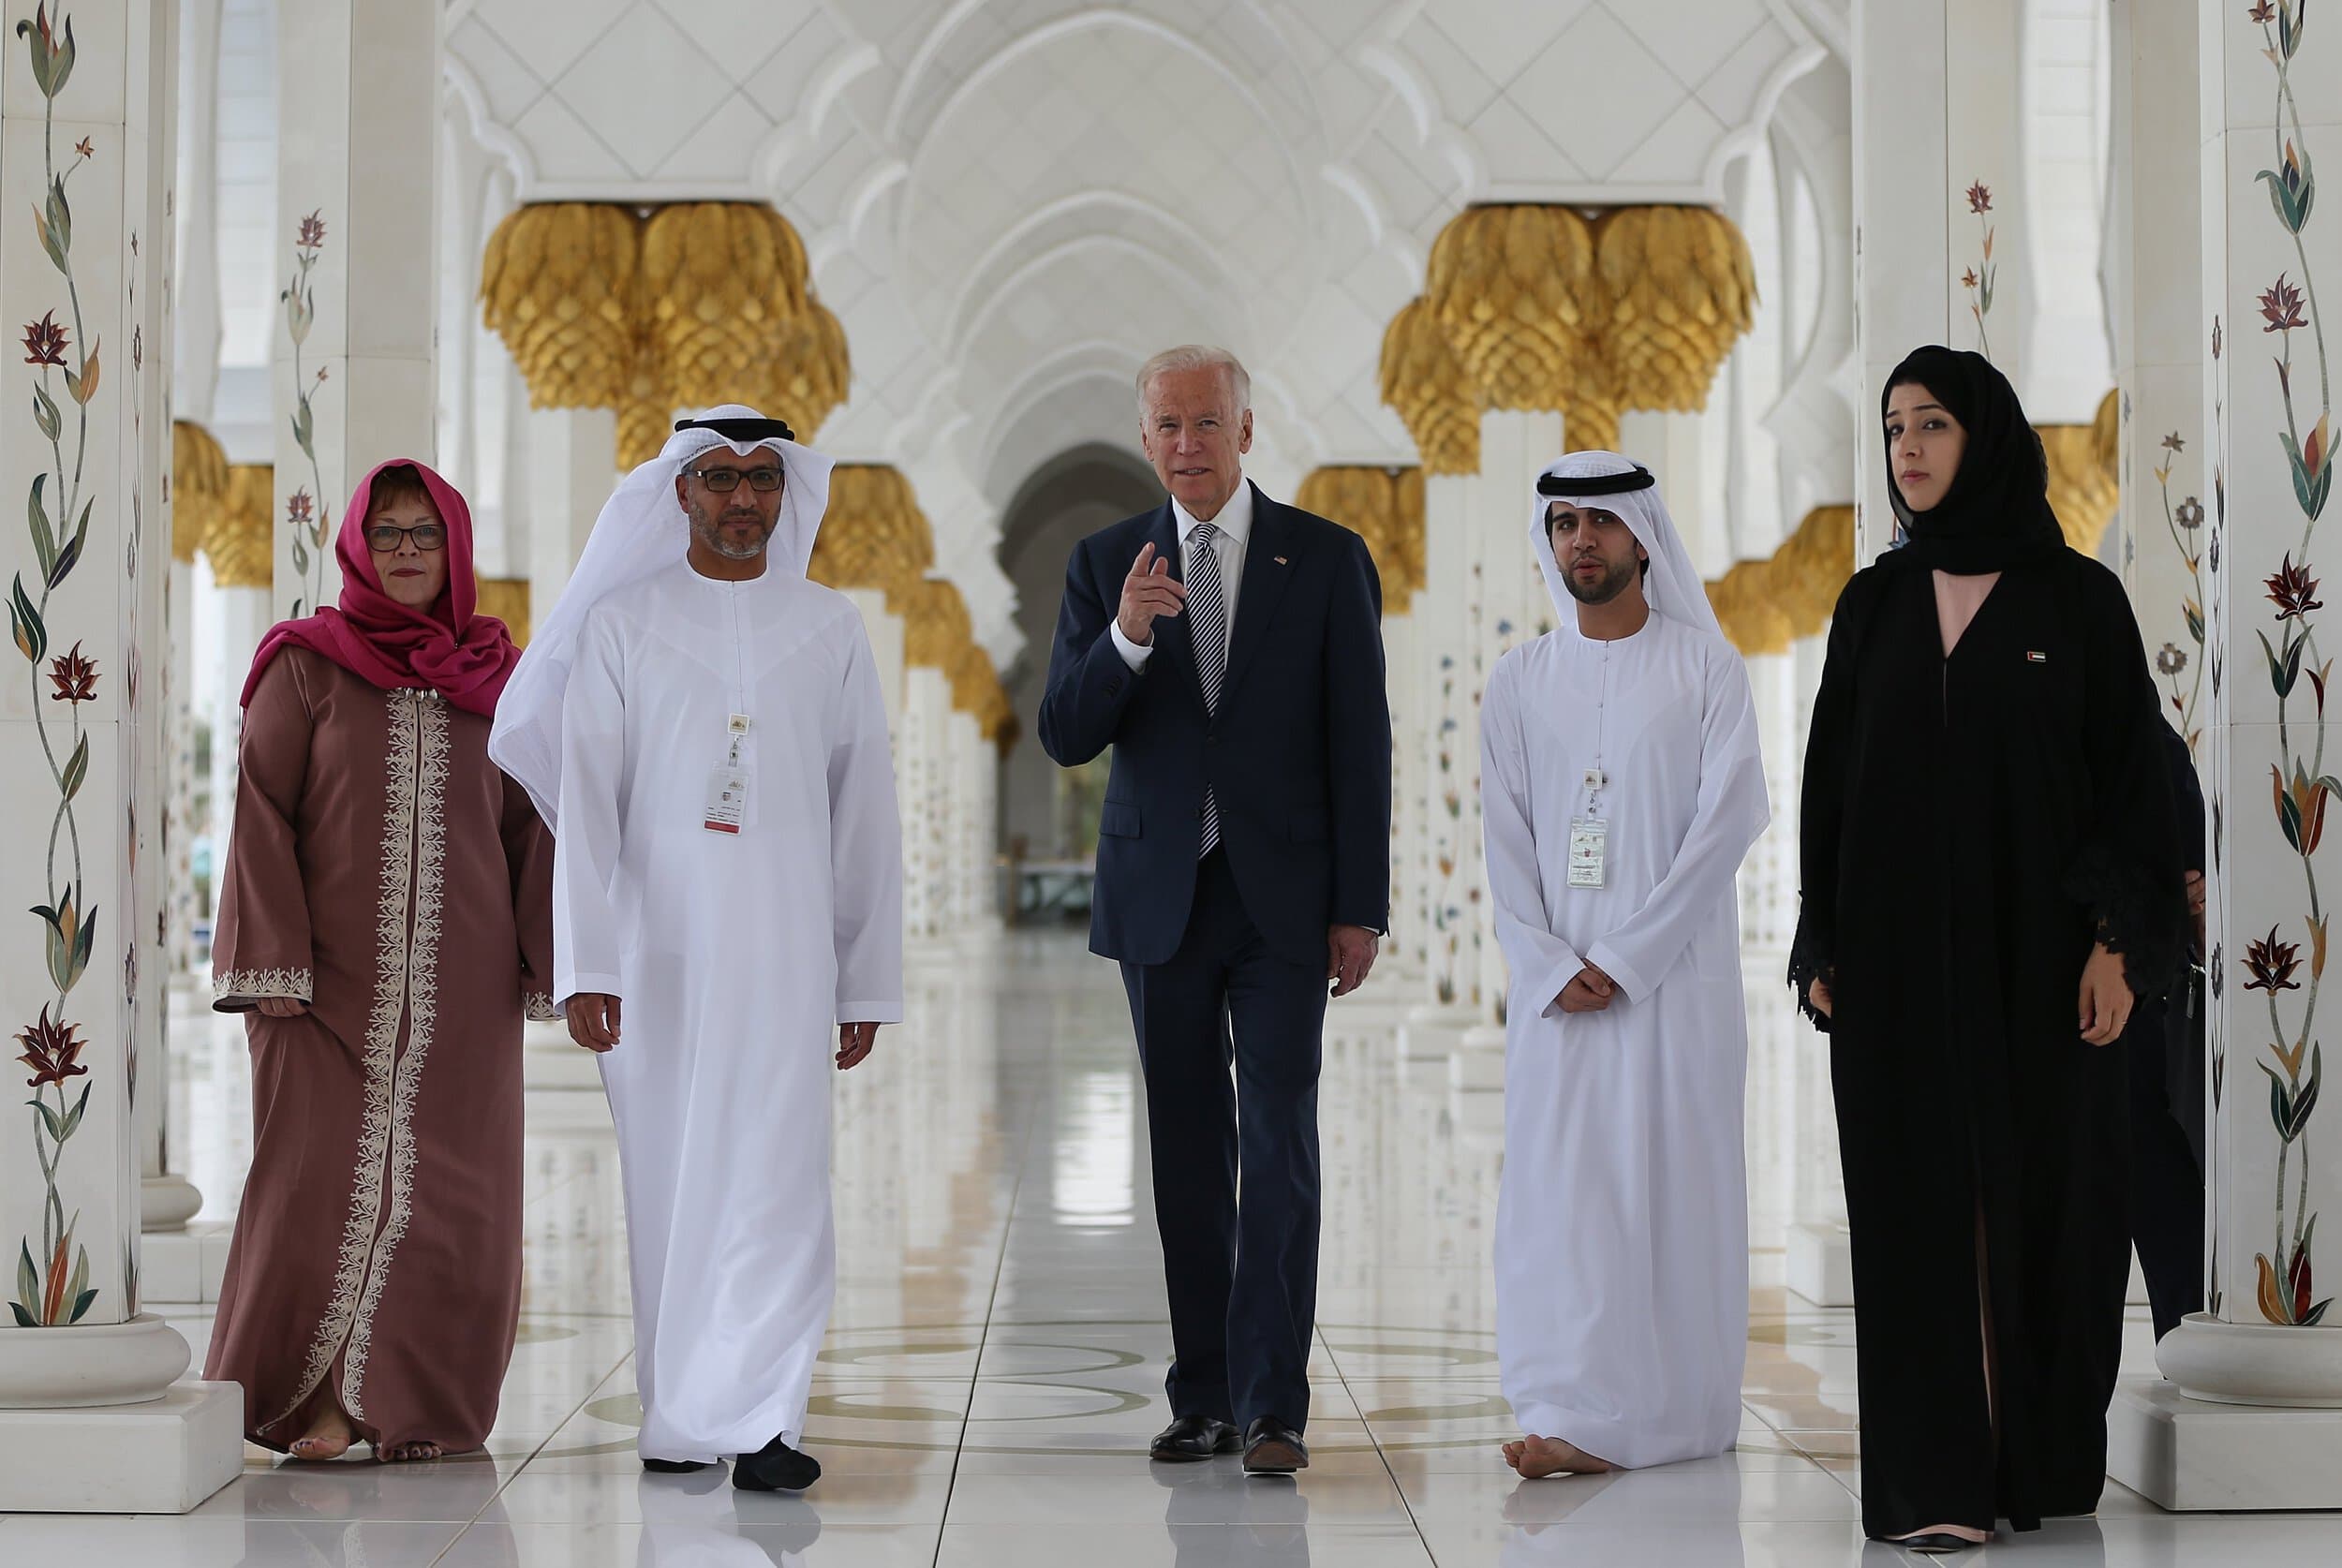 United States Vice President Joe Biden conducted a two-day visit to the UAE, which underscored the strong bilateral relationship between the two countries. During the visit, the US Vice President called the bond between the UAE and US "one of the most significant in the region" and highlighted the UAE's role in the fight against ISIL and extremism. 